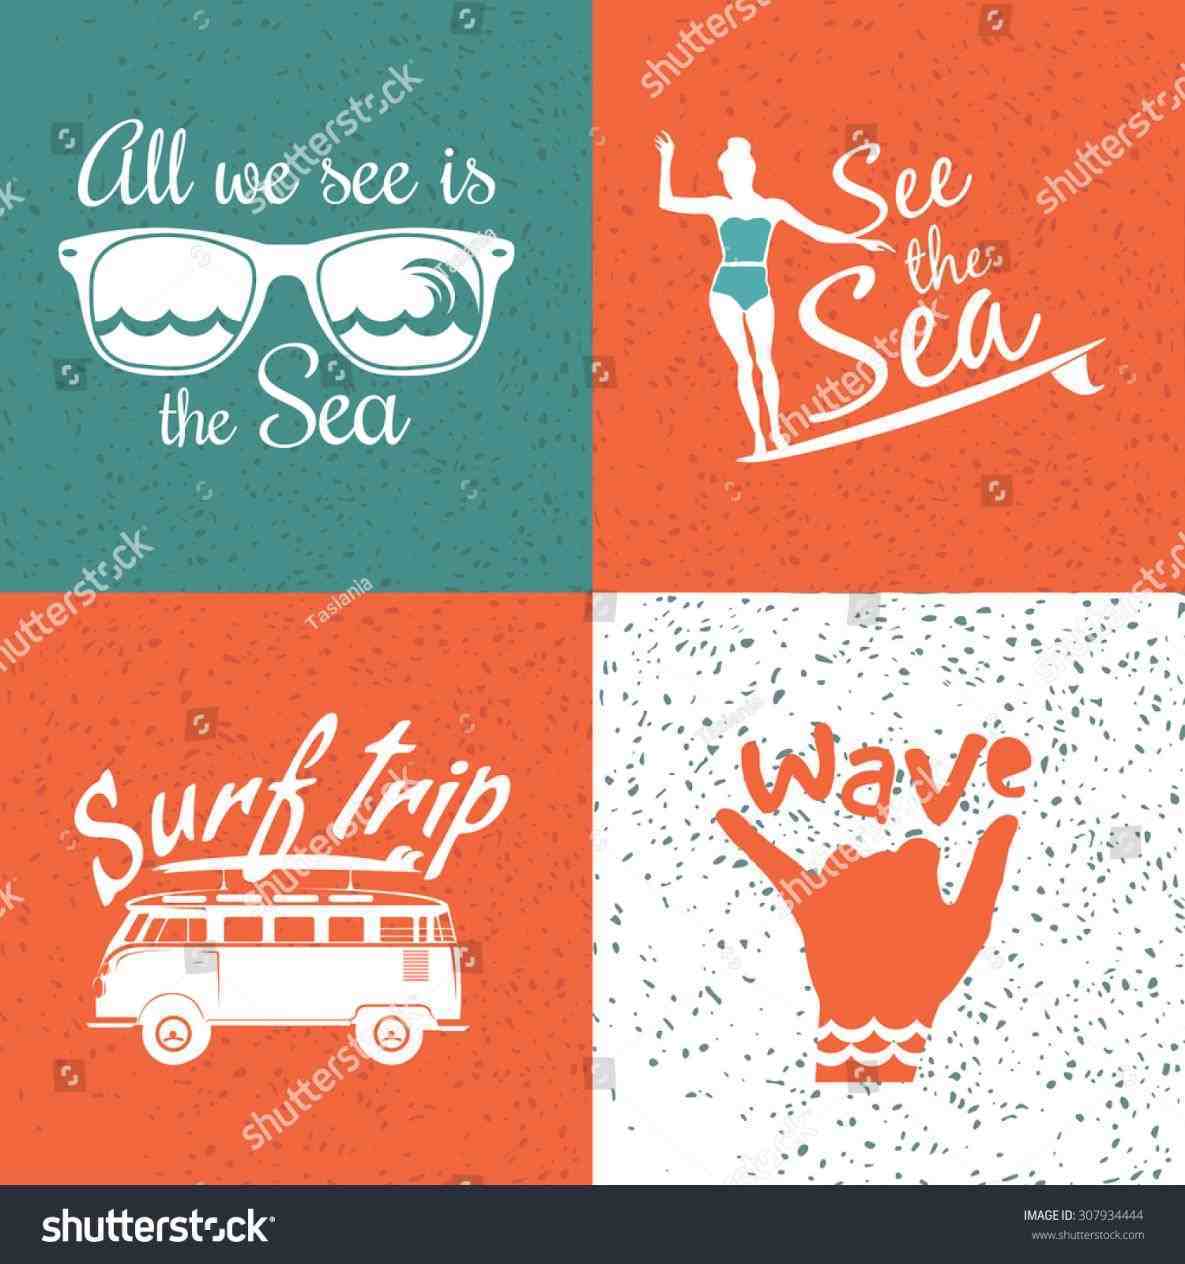 Vintage Surf Logo - Surfing decals from the s graphics srhcouk logo